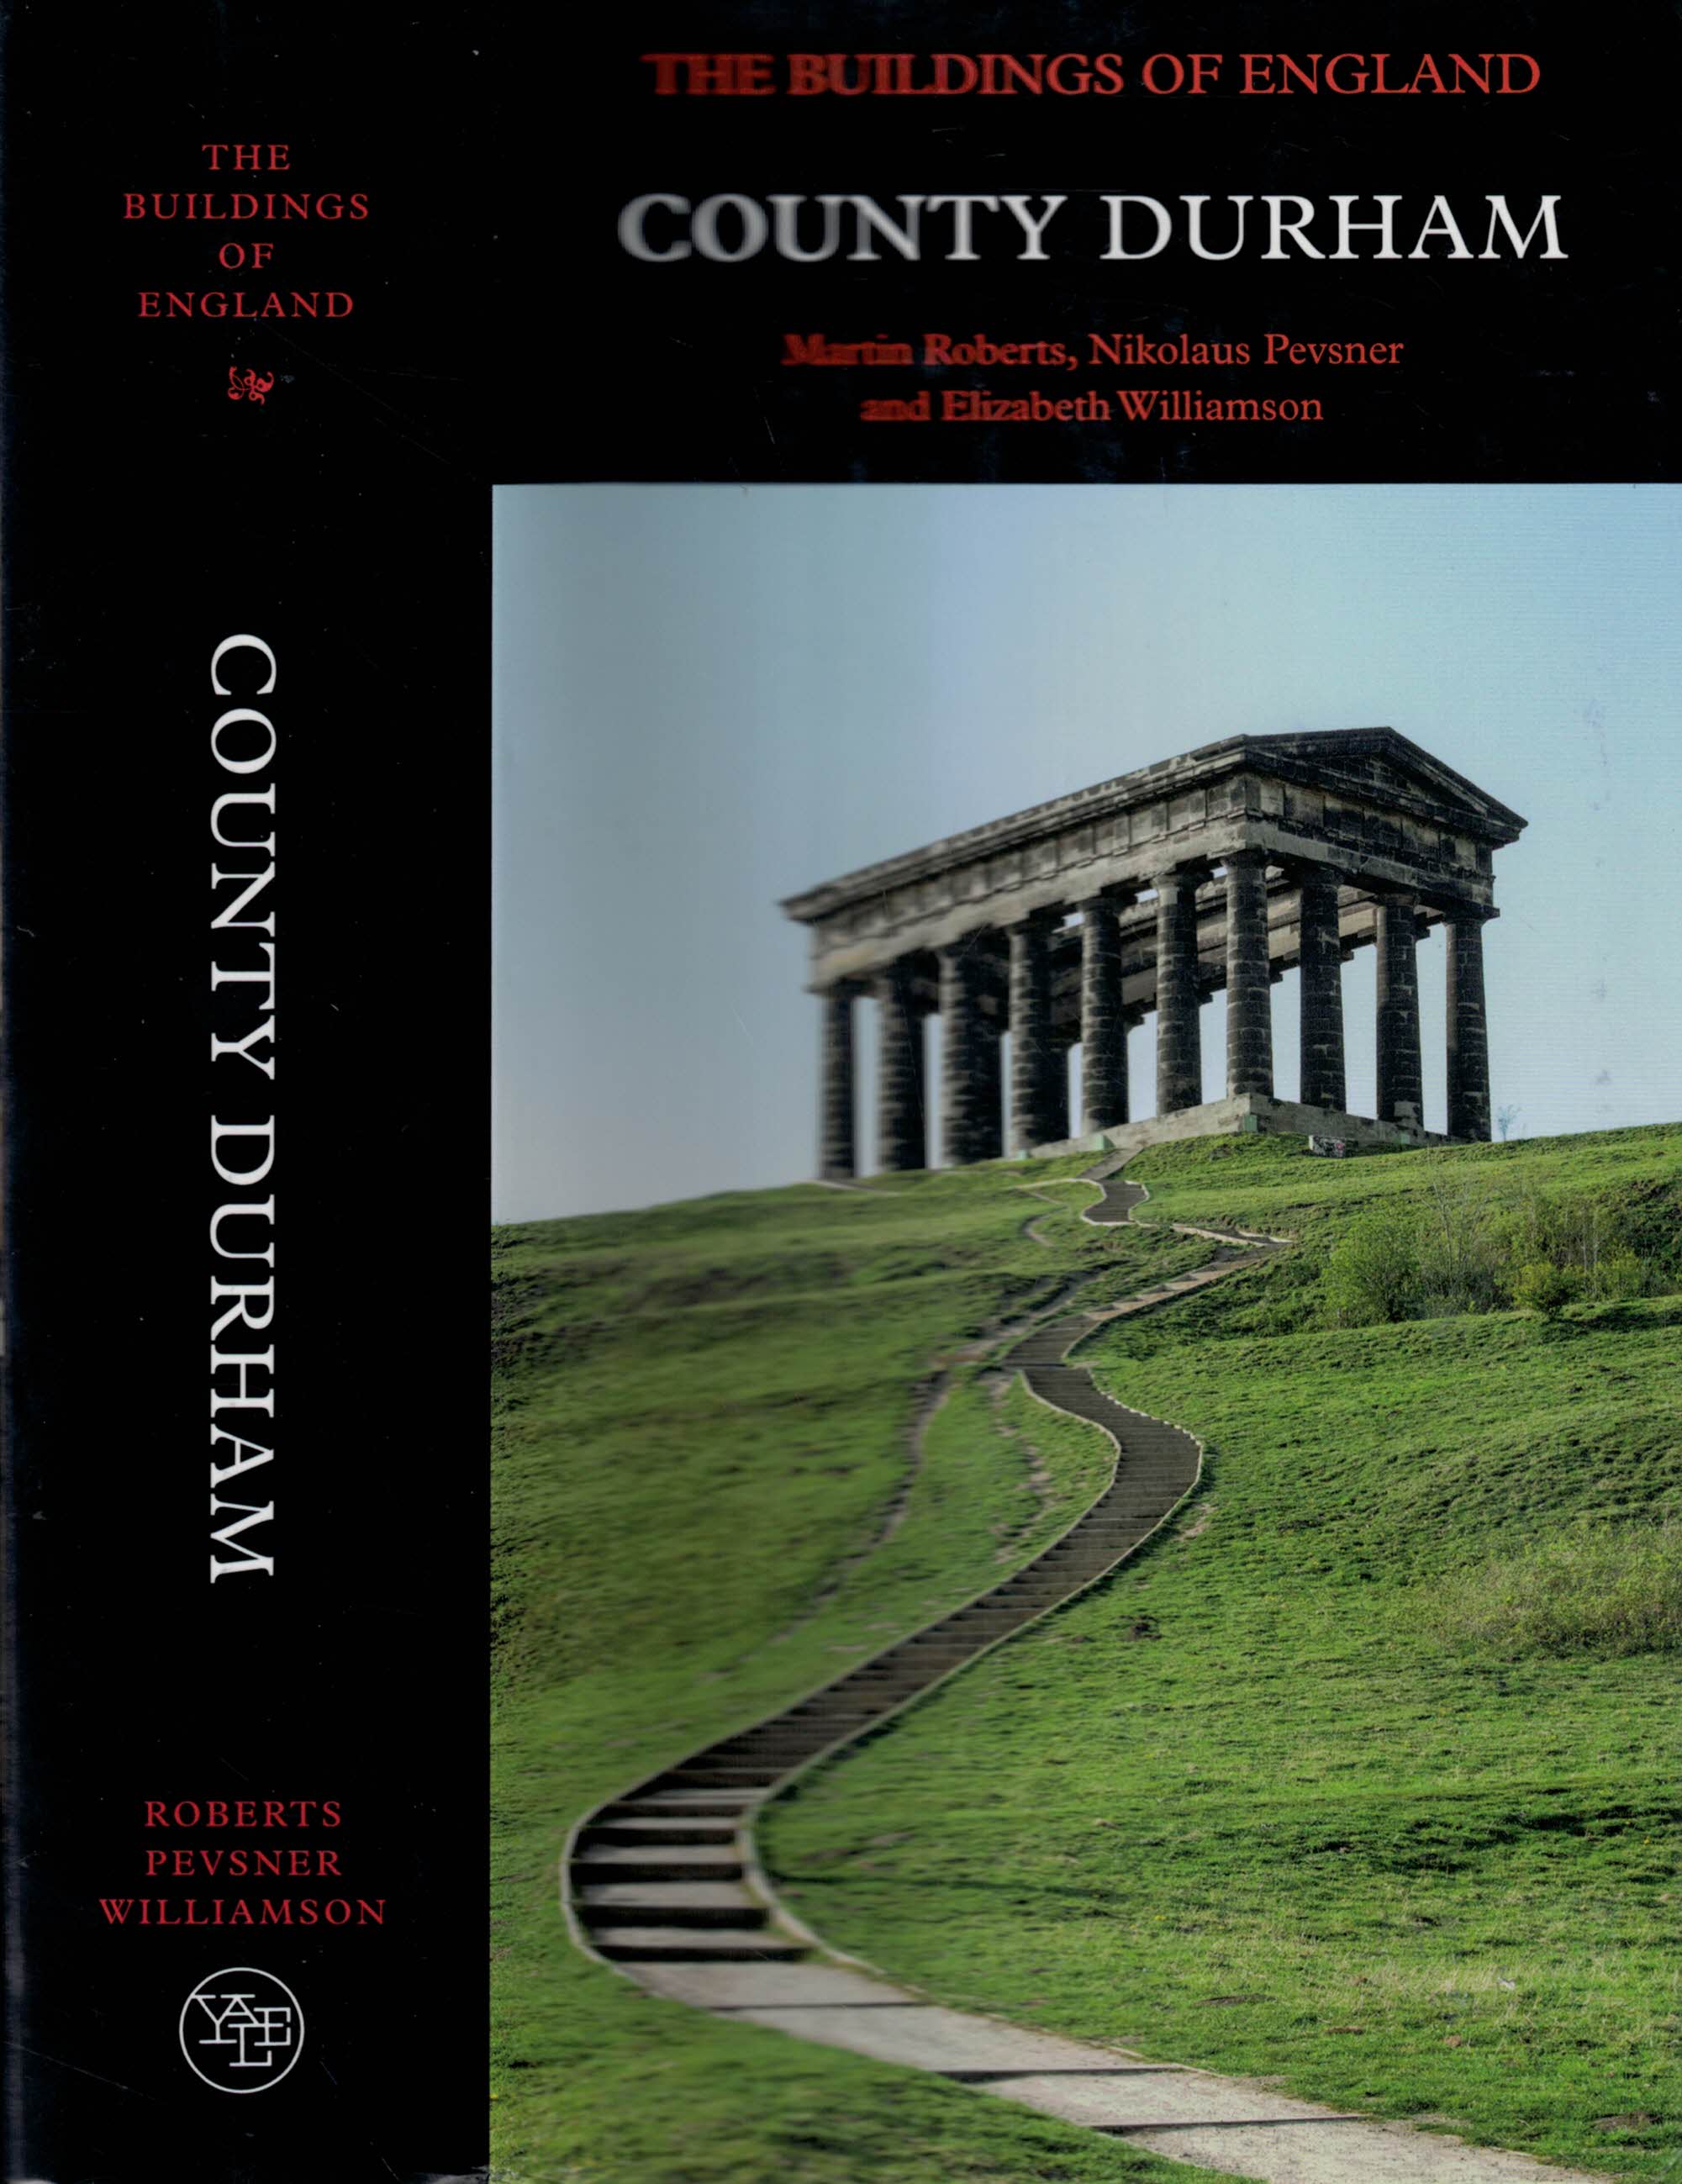 County Durham. The Buildings of England. BE 9. 2000.